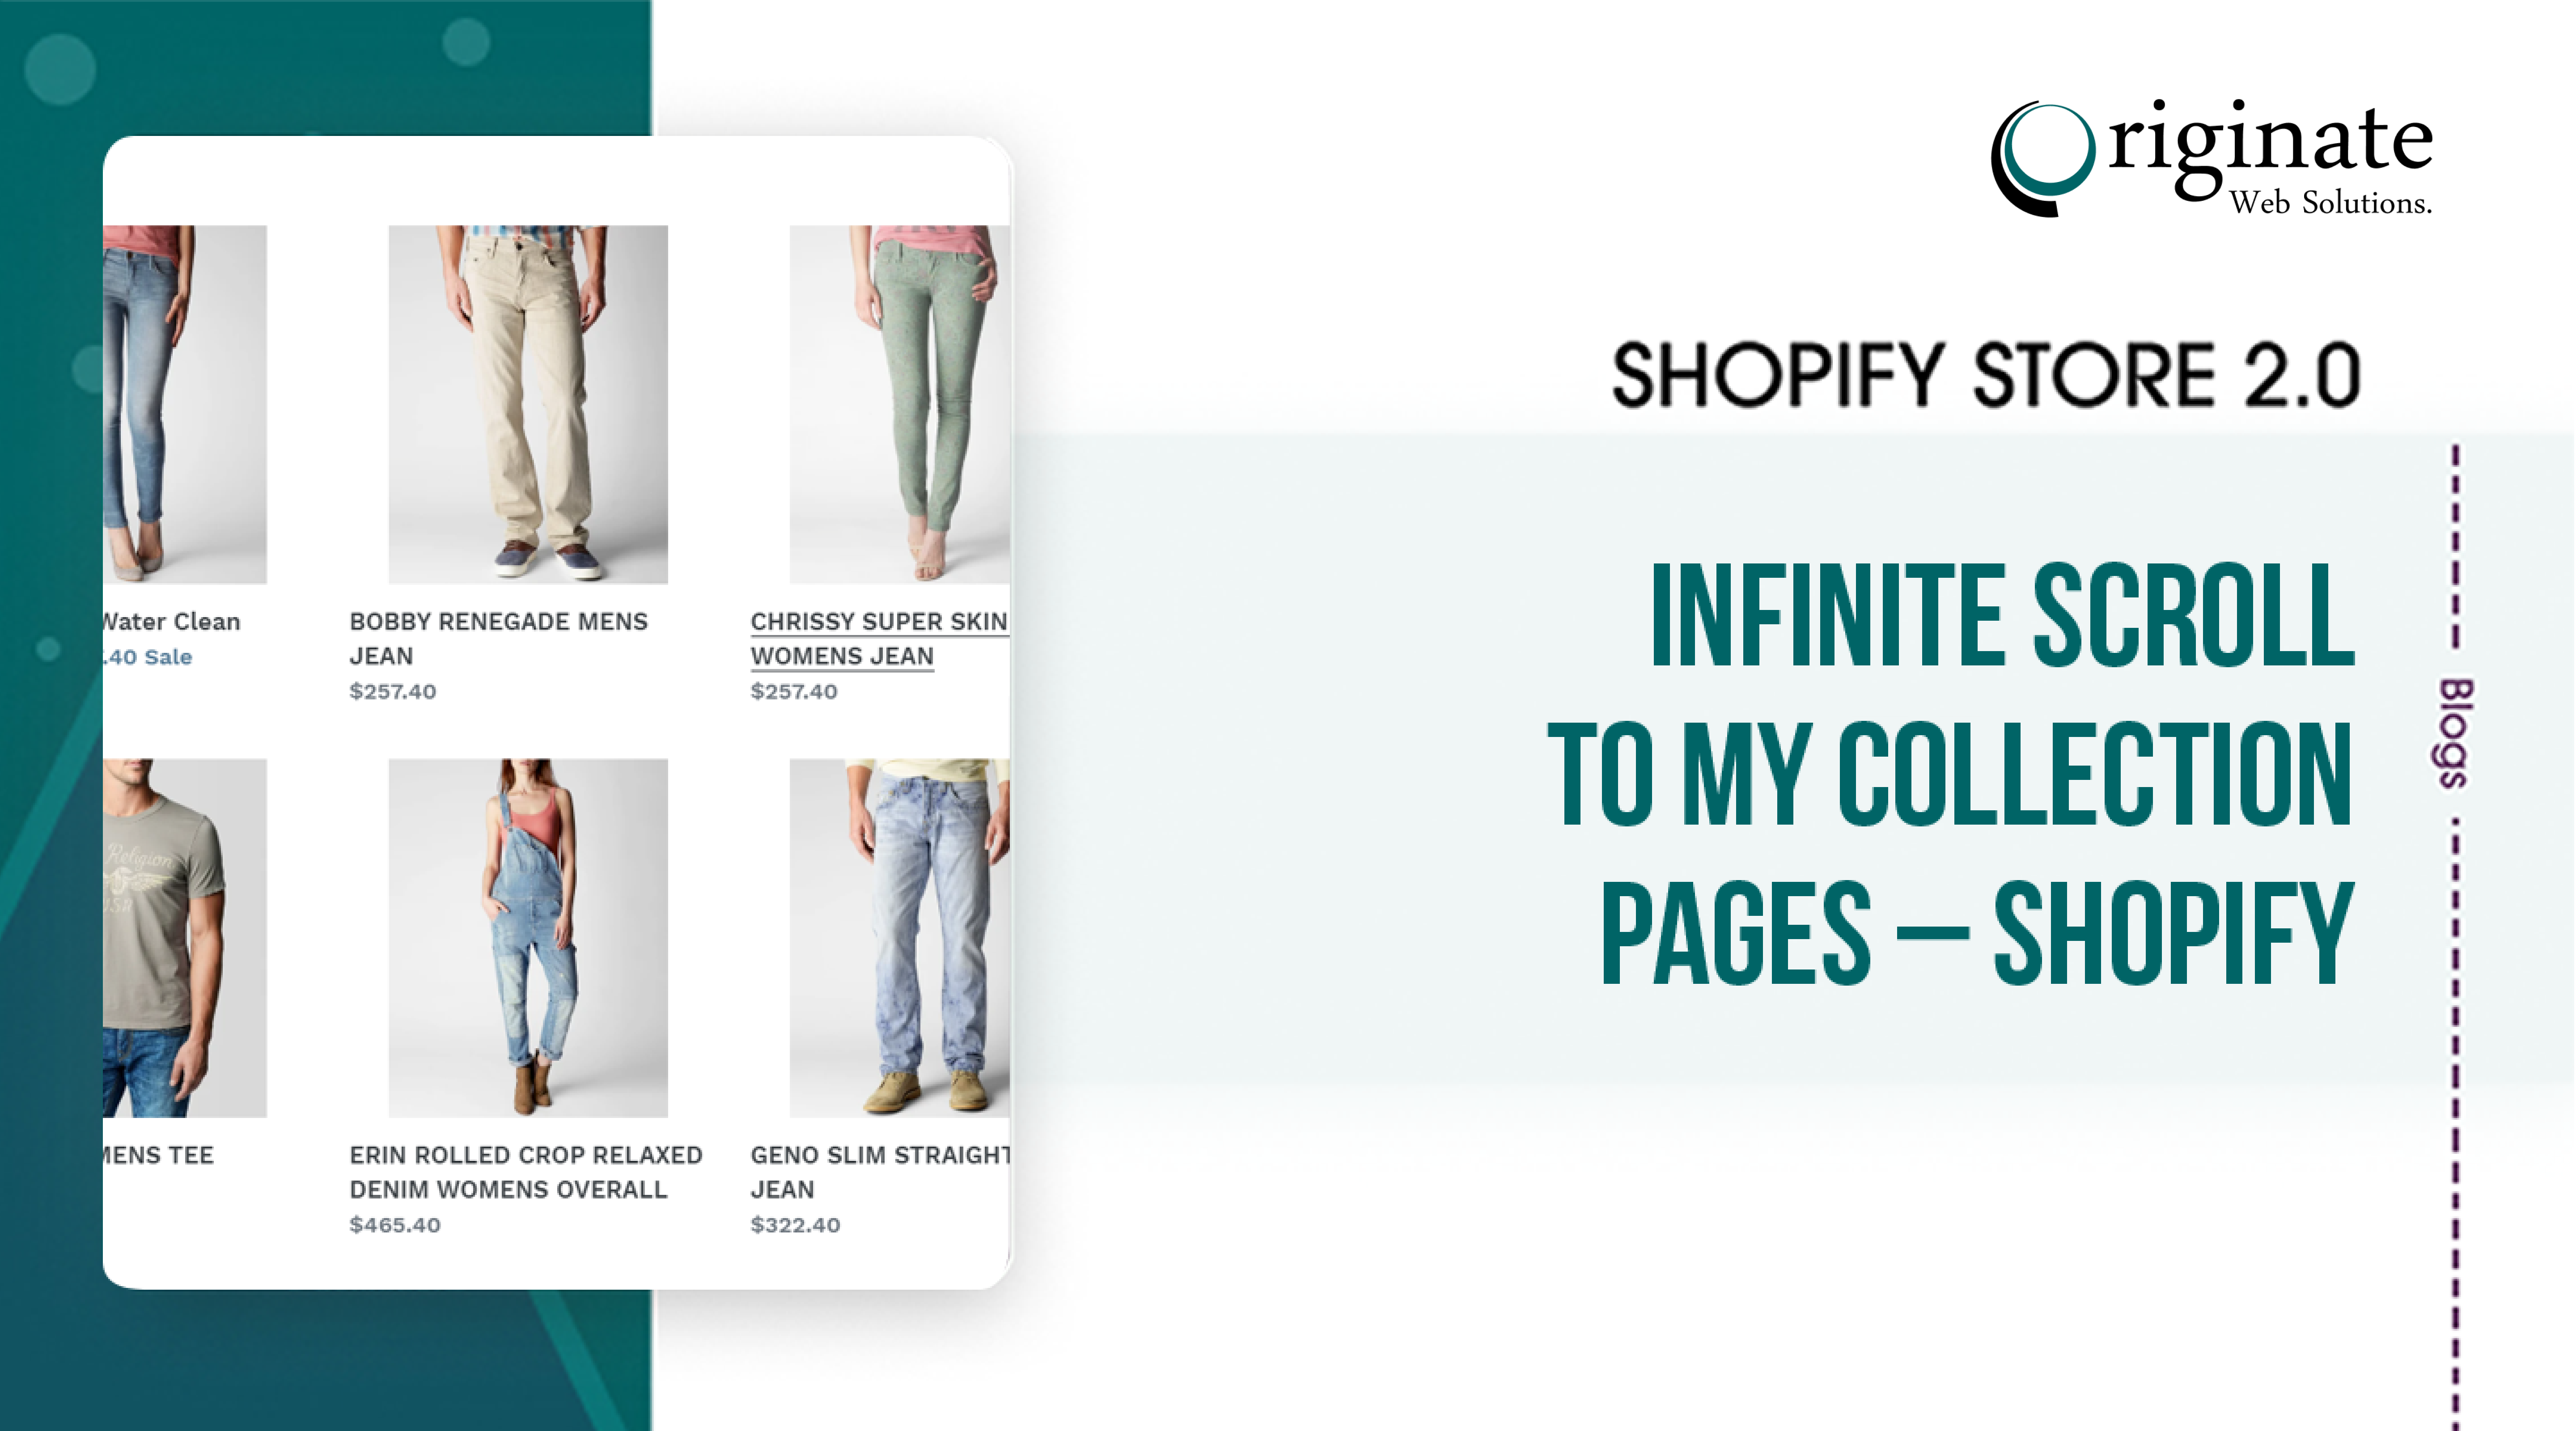 Infinite Scroll To My Collection Pages – Shopify